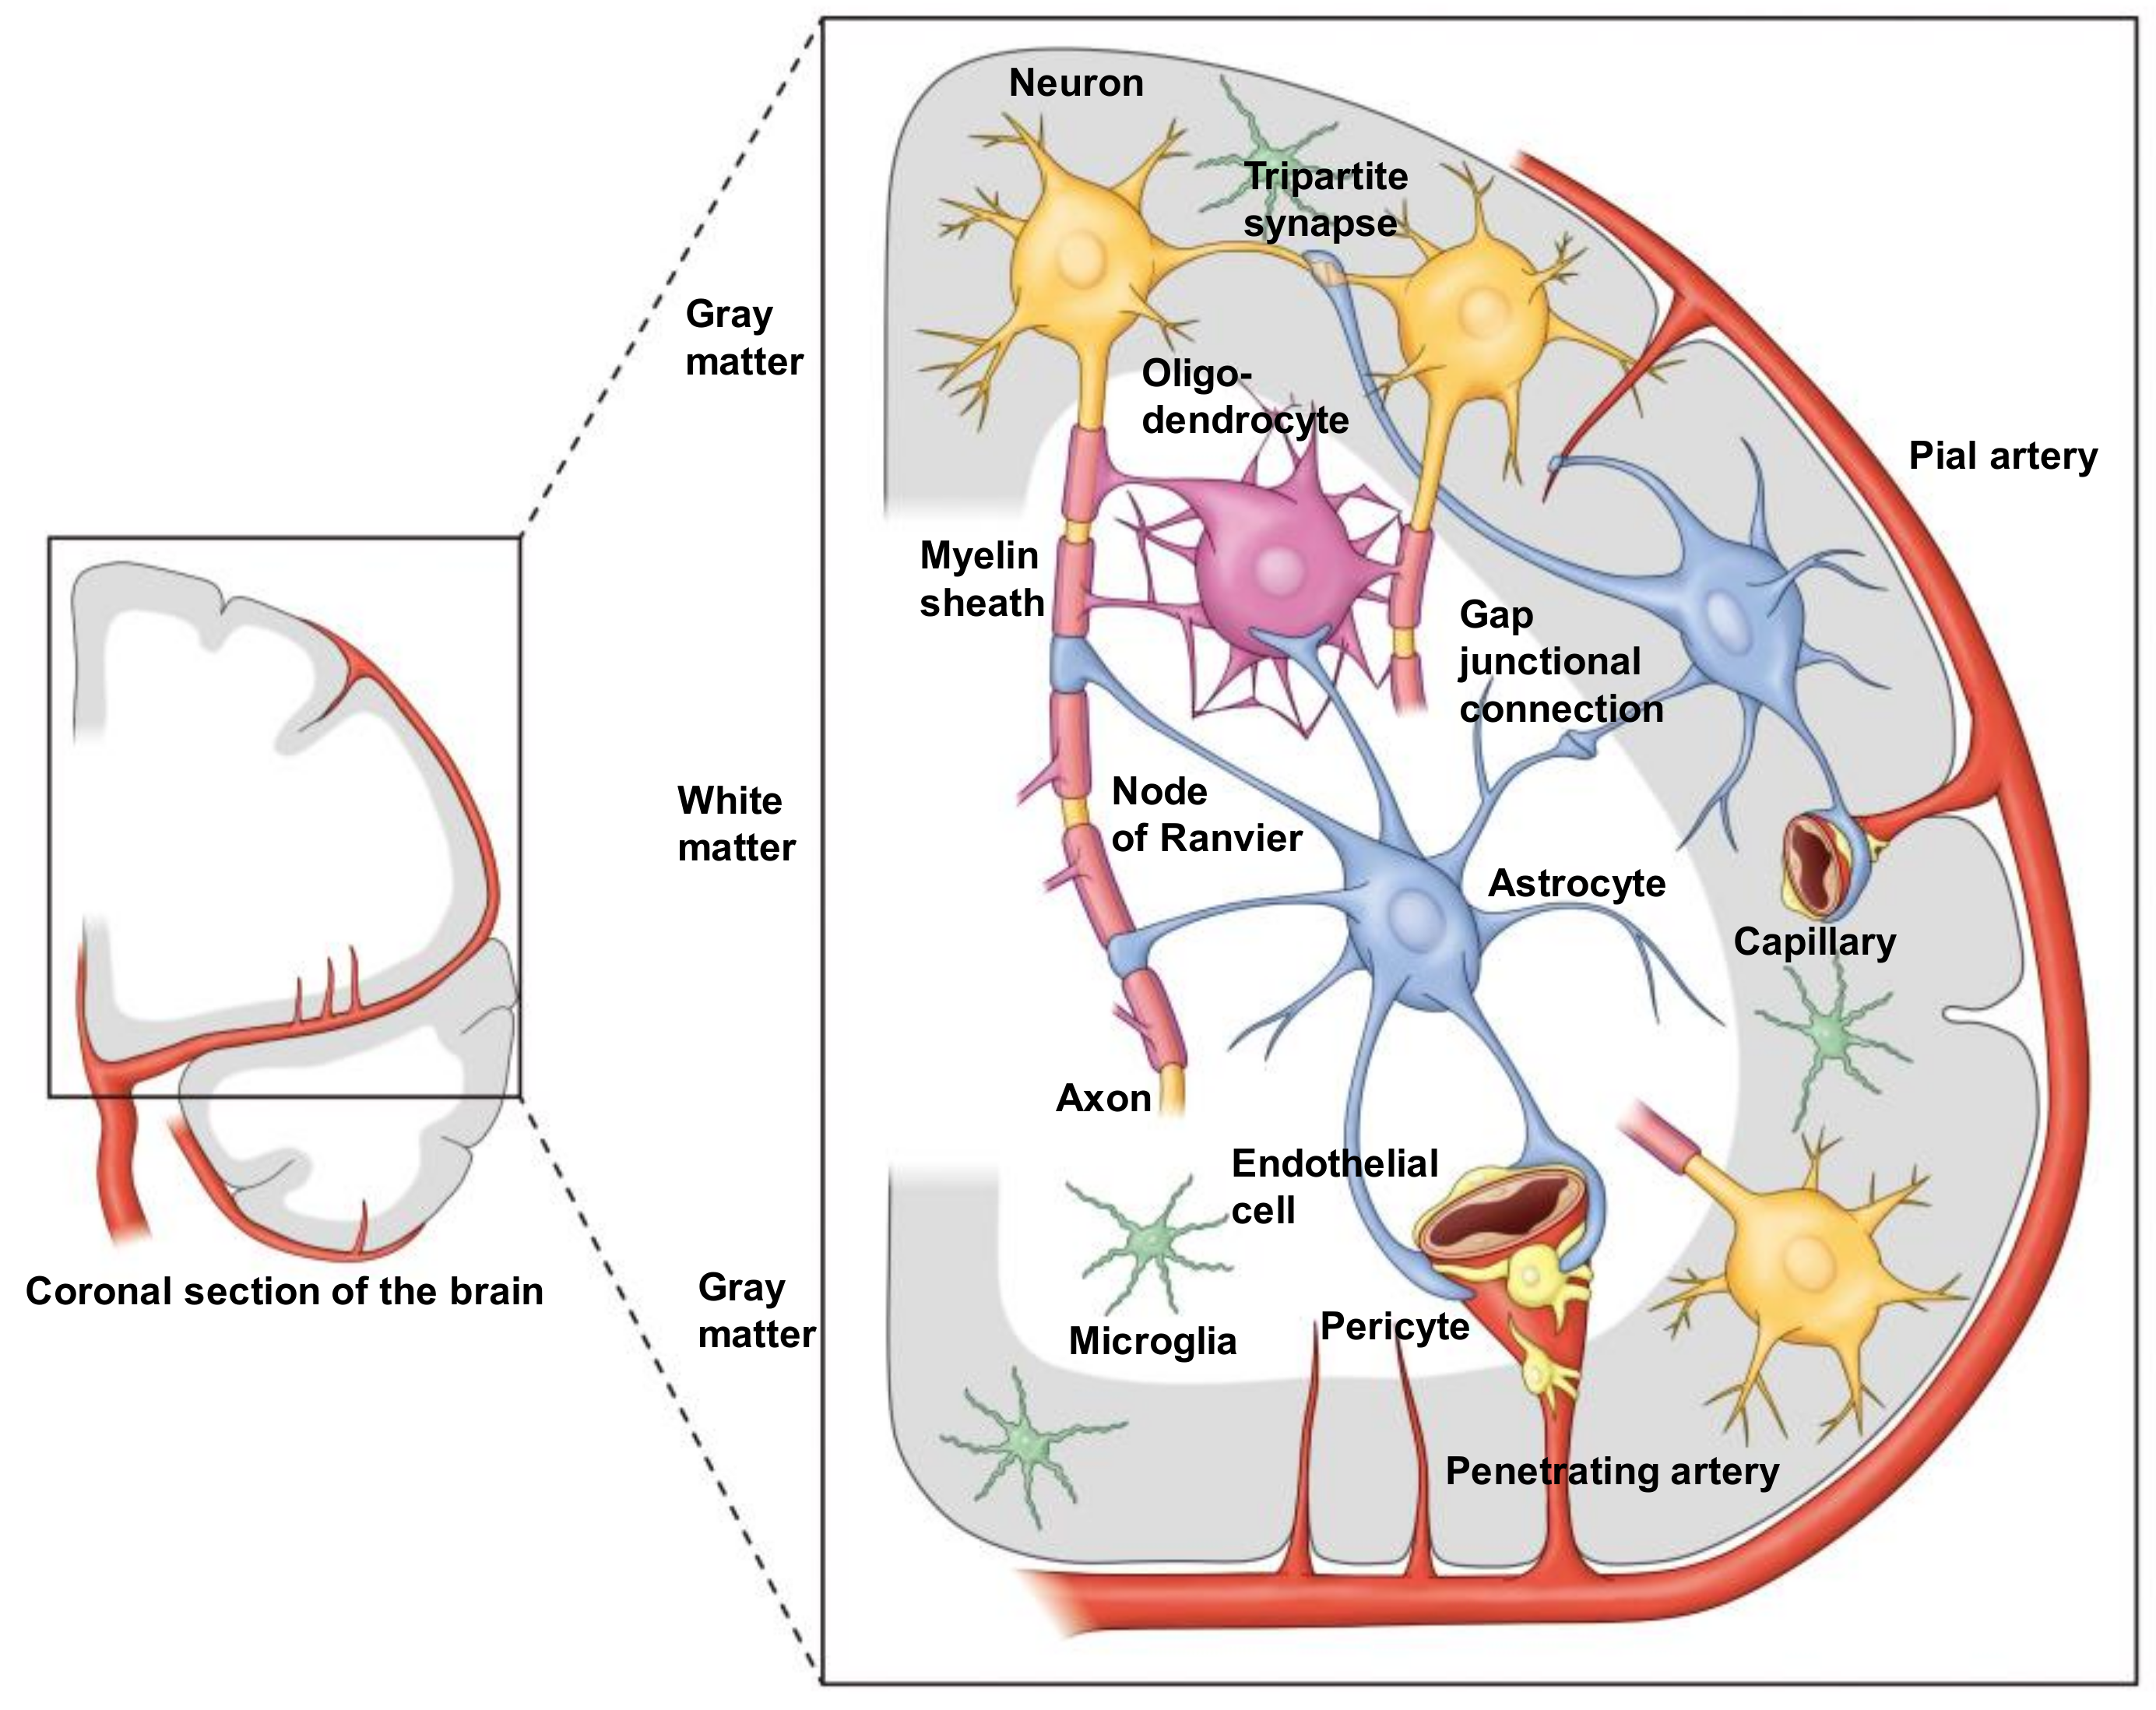 Schematic representation illustrating the astrocyte-synapse alterations